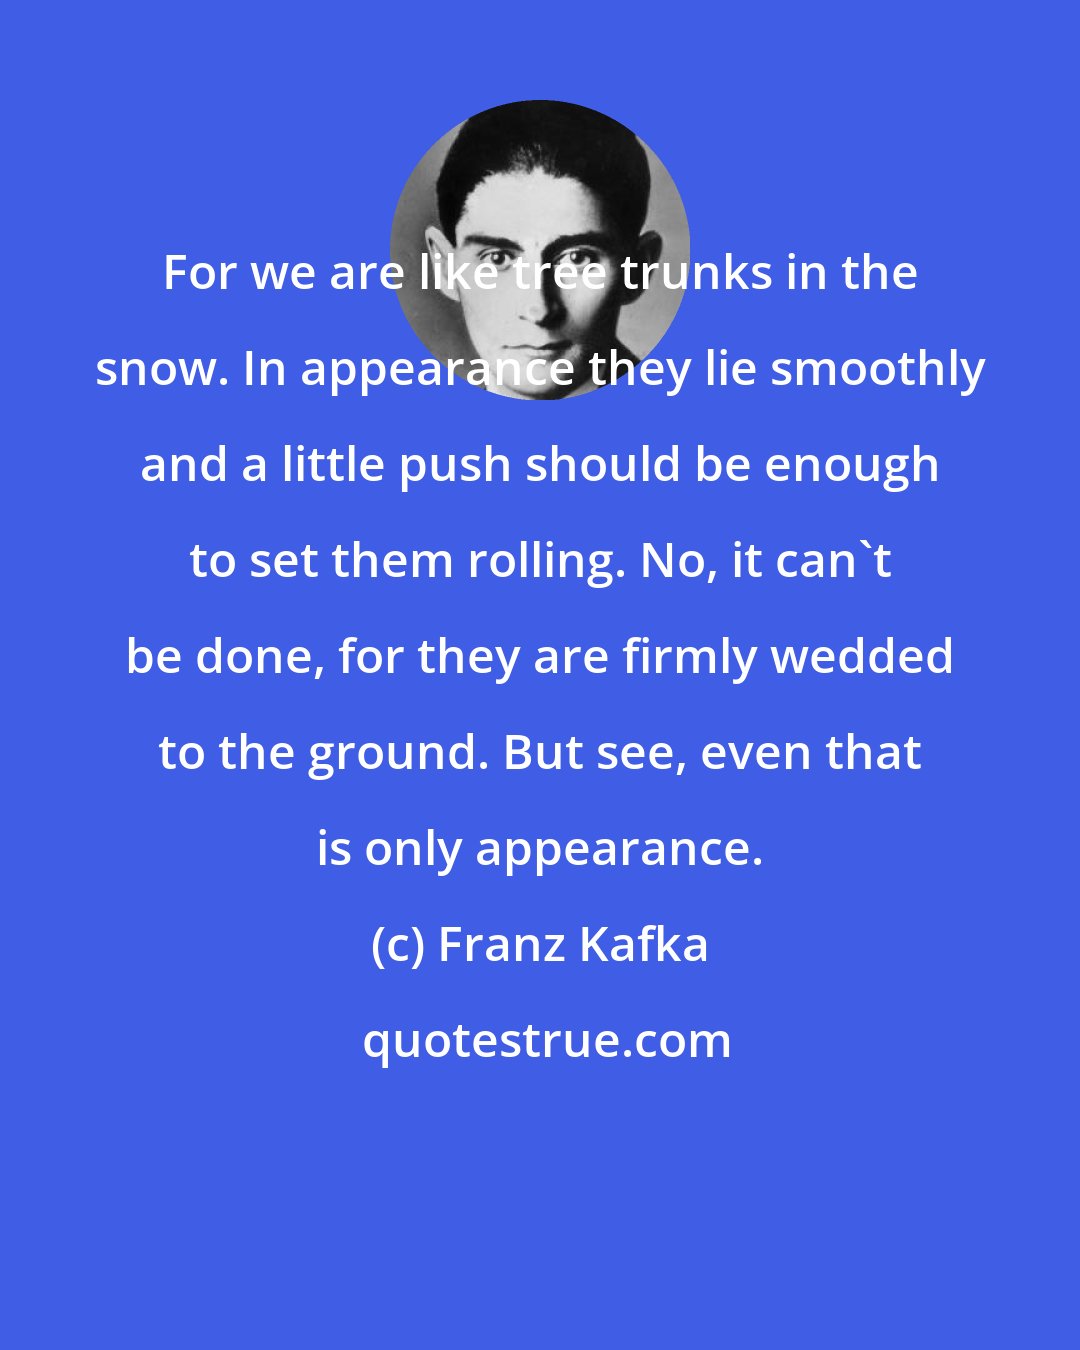 Franz Kafka: For we are like tree trunks in the snow. In appearance they lie smoothly and a little push should be enough to set them rolling. No, it can't be done, for they are firmly wedded to the ground. But see, even that is only appearance.